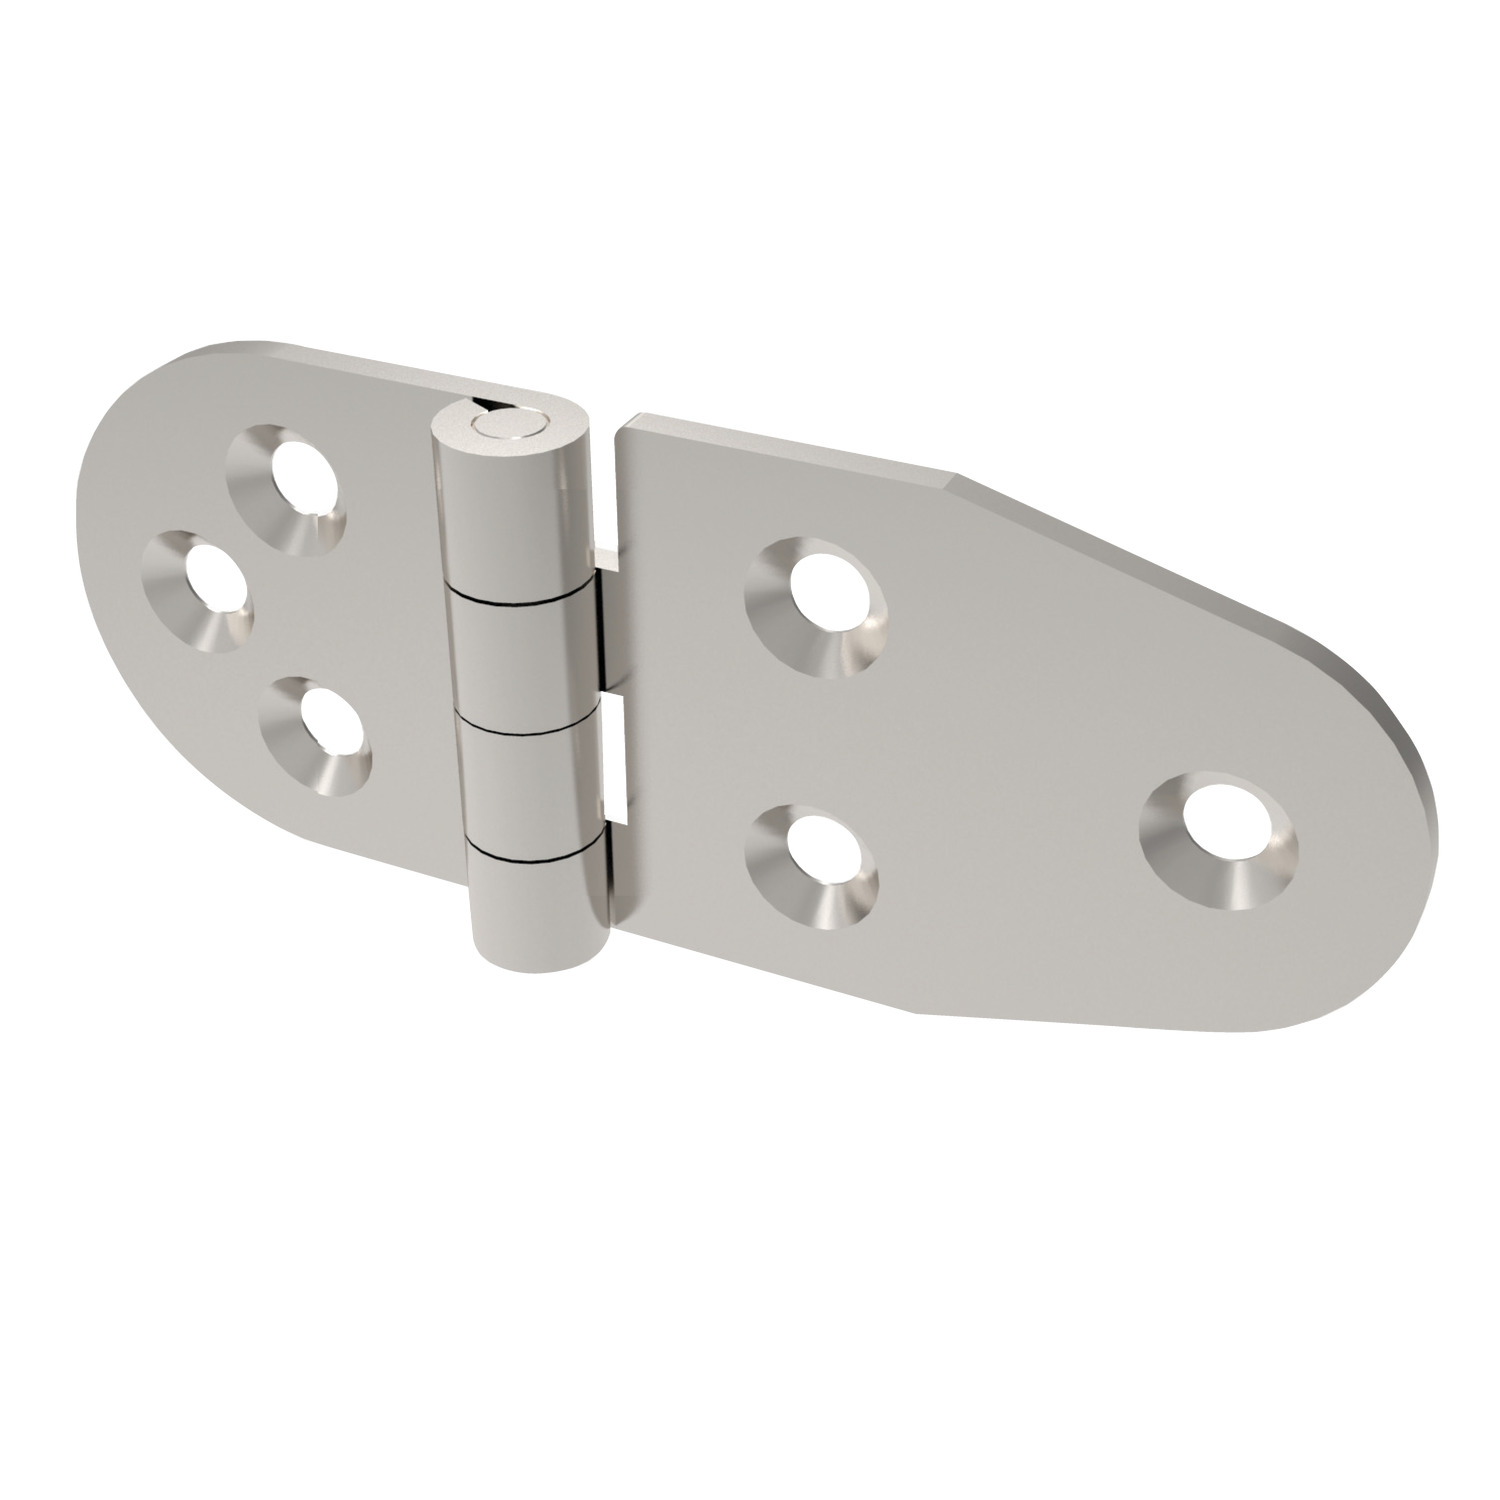 Surface Mount - Leaf Hinges Surface mount external hinges - Screw mounted. Opening angle of 180°. Made from stainless steel.